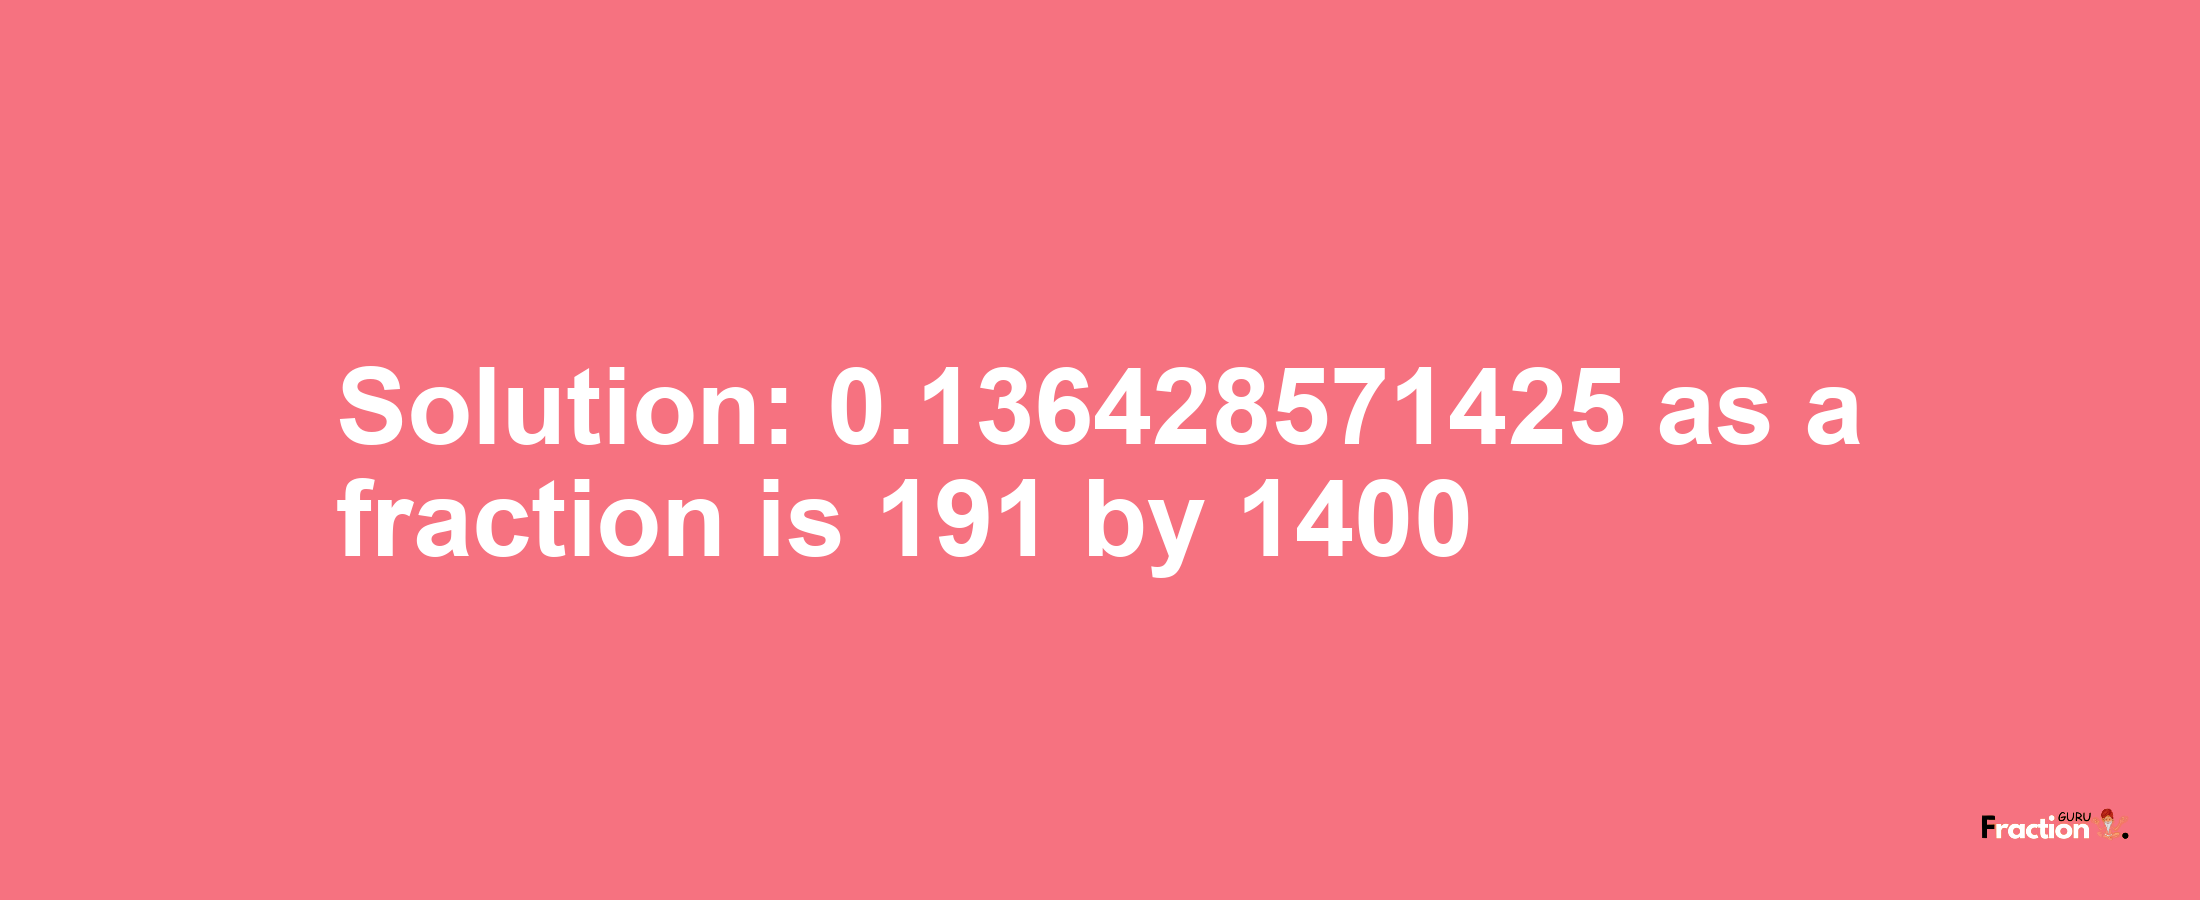 Solution:0.136428571425 as a fraction is 191/1400